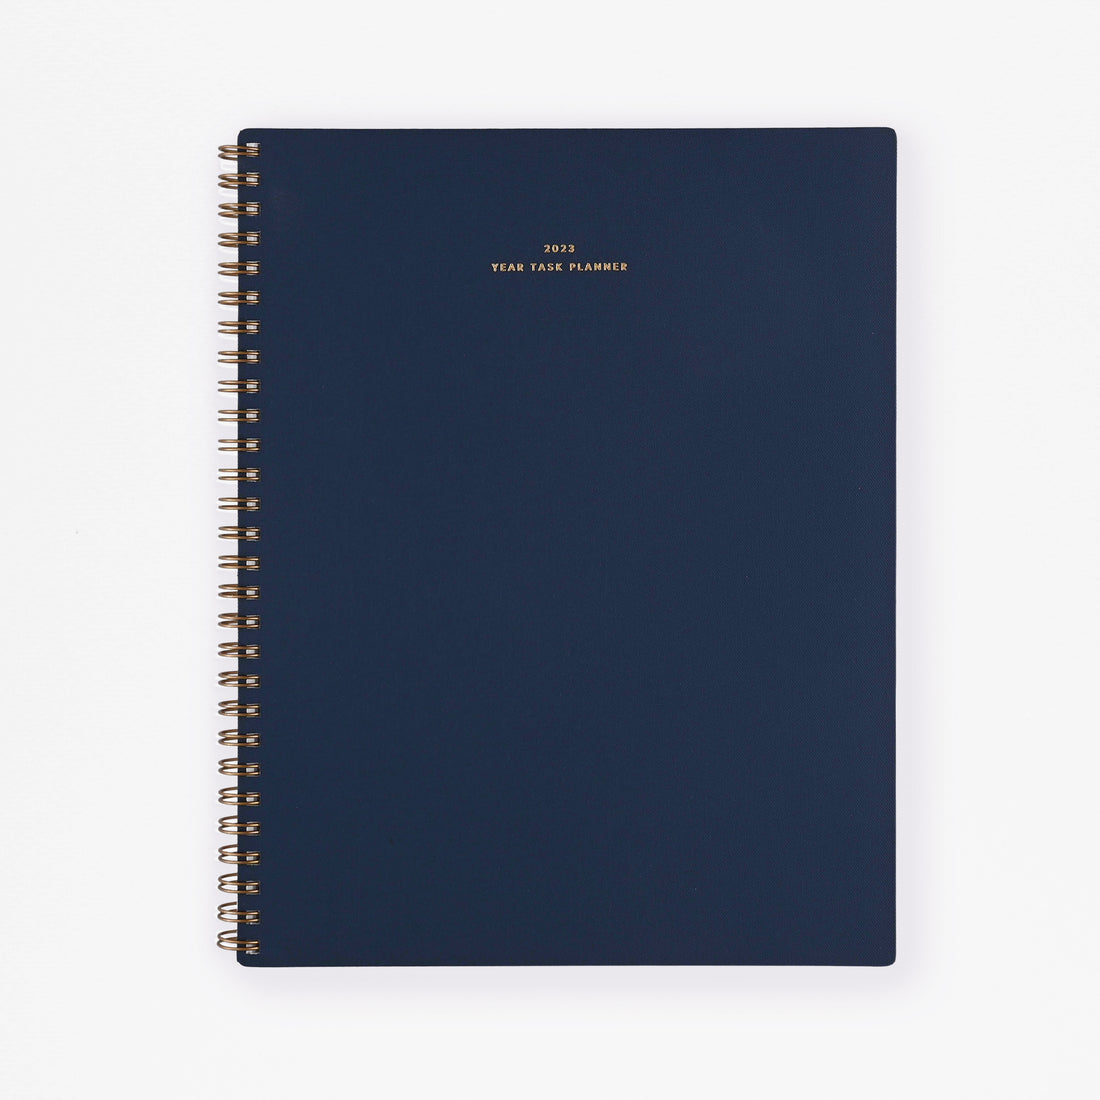 Appointed 2023 Year Task Planner | Mineral Green, Charcoal Gray, Lavender Gray, Fern Green Or Oxford Blue Oxford Blue